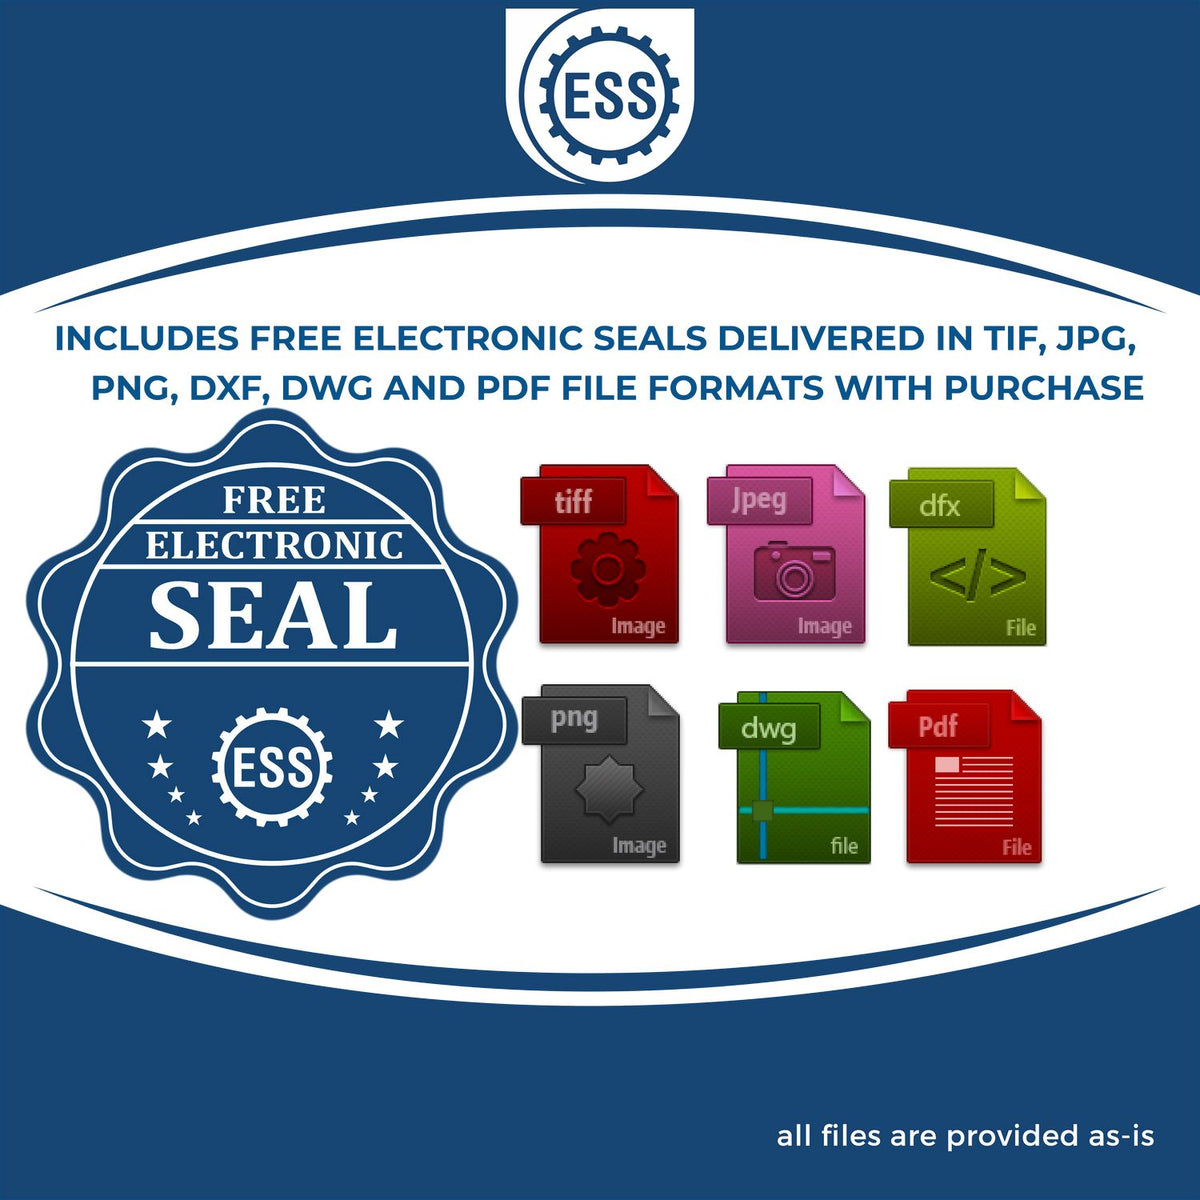 An infographic for the free electronic seal for the Self-Inking Maryland Geologist Stamp illustrating the different file type icons such as DXF, DWG, TIF, JPG and PNG.